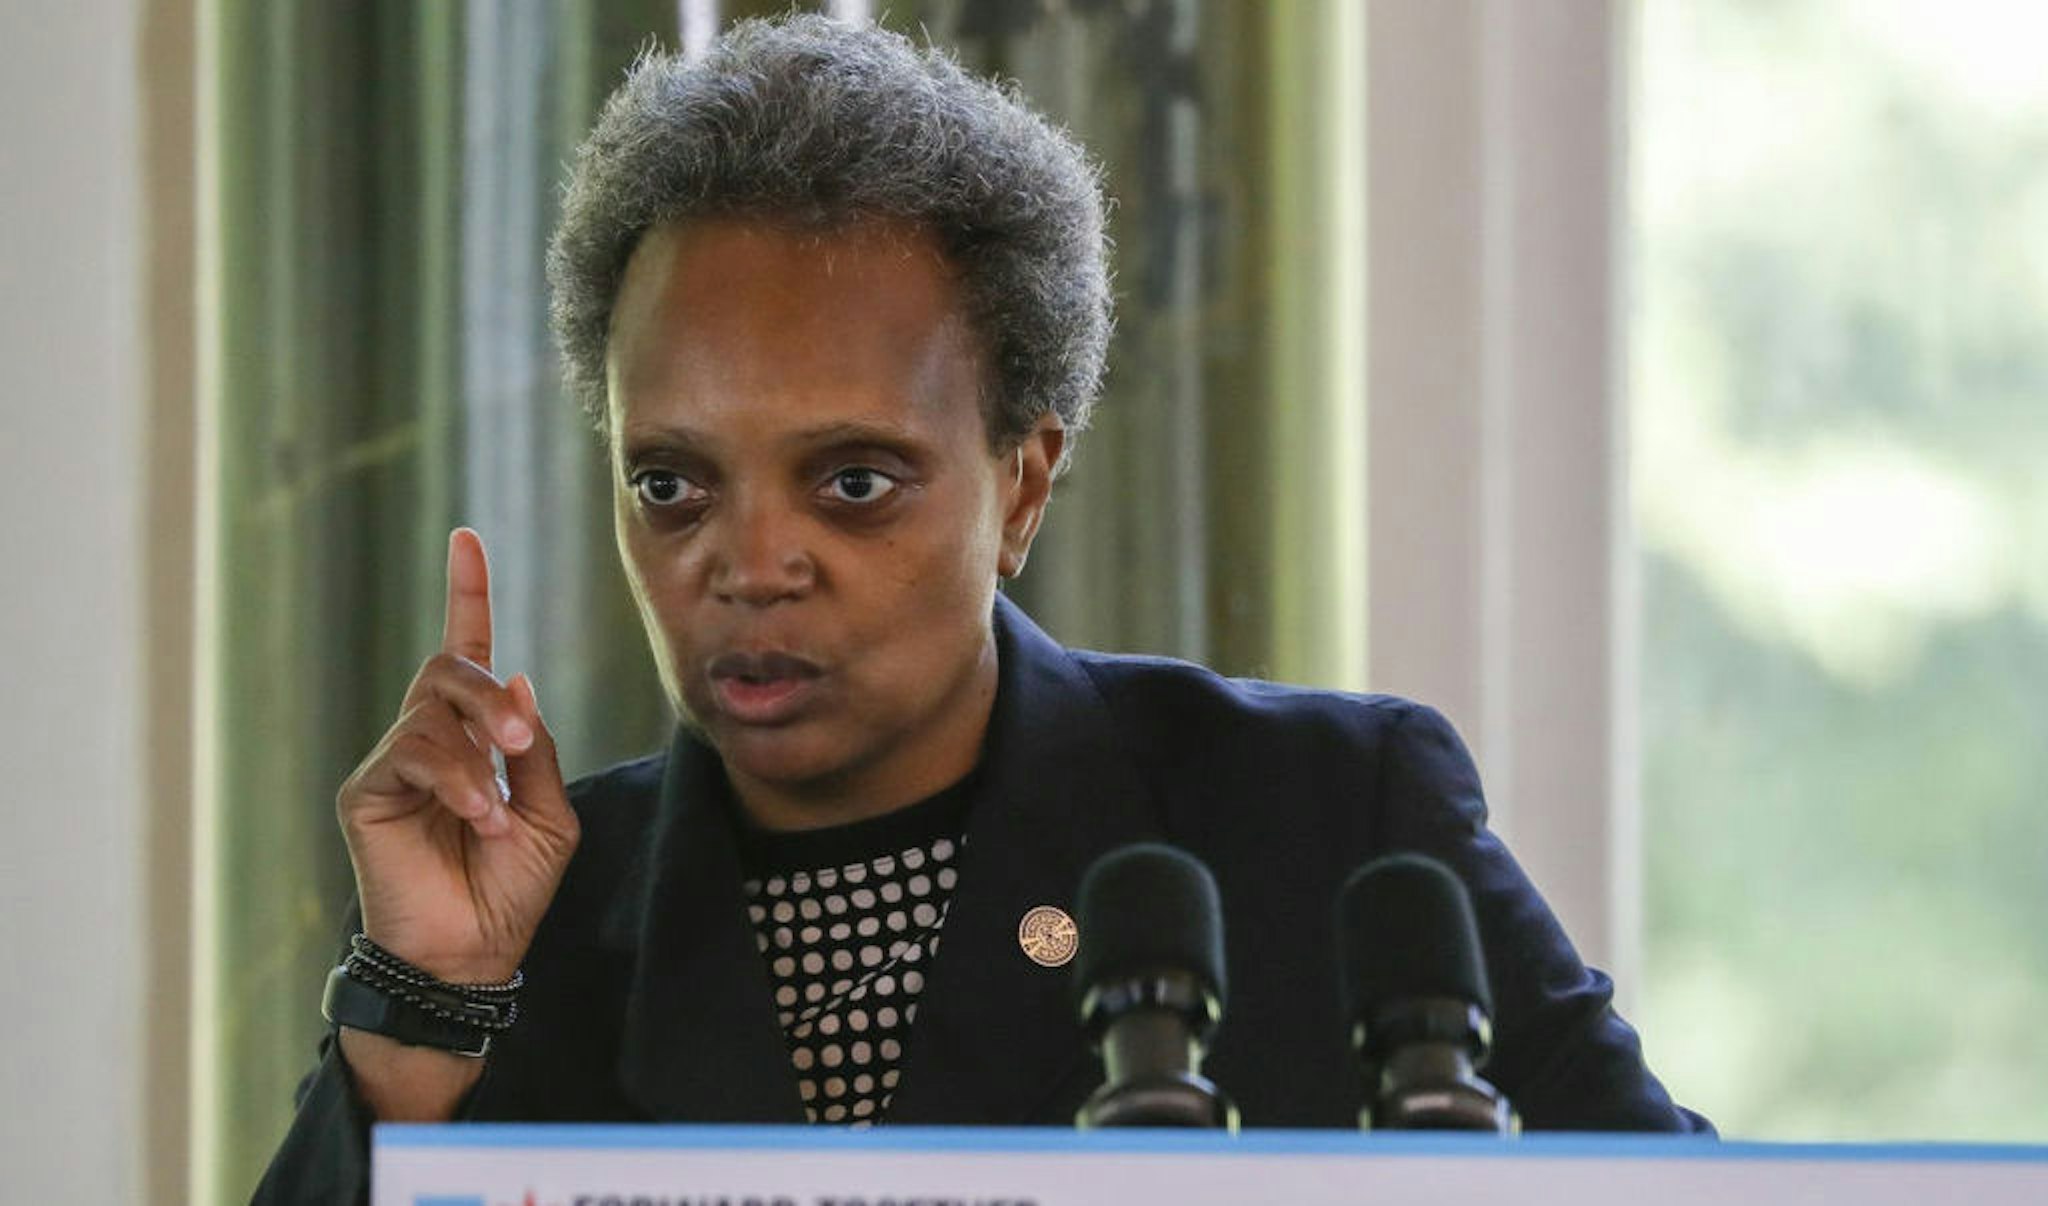 Mayor Lori Lightfoot at South Shore Cultural Center in Chicago on July 9, 2020. (Jose M. Osorio/Chicago Tribune/TNS)